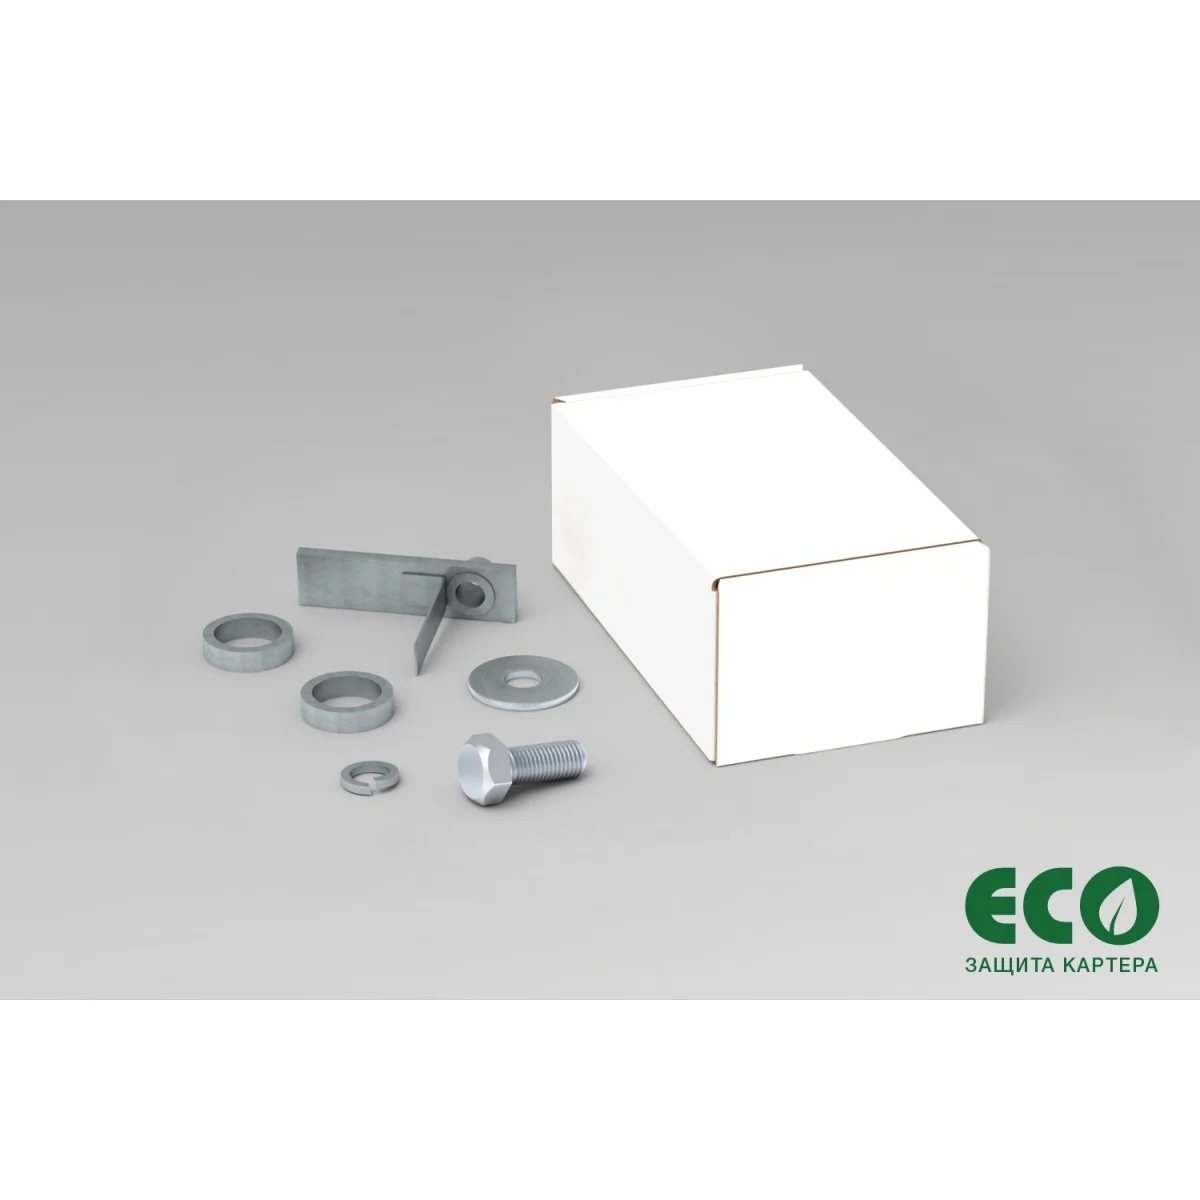 Set of fasteners for зкпп eco, ...